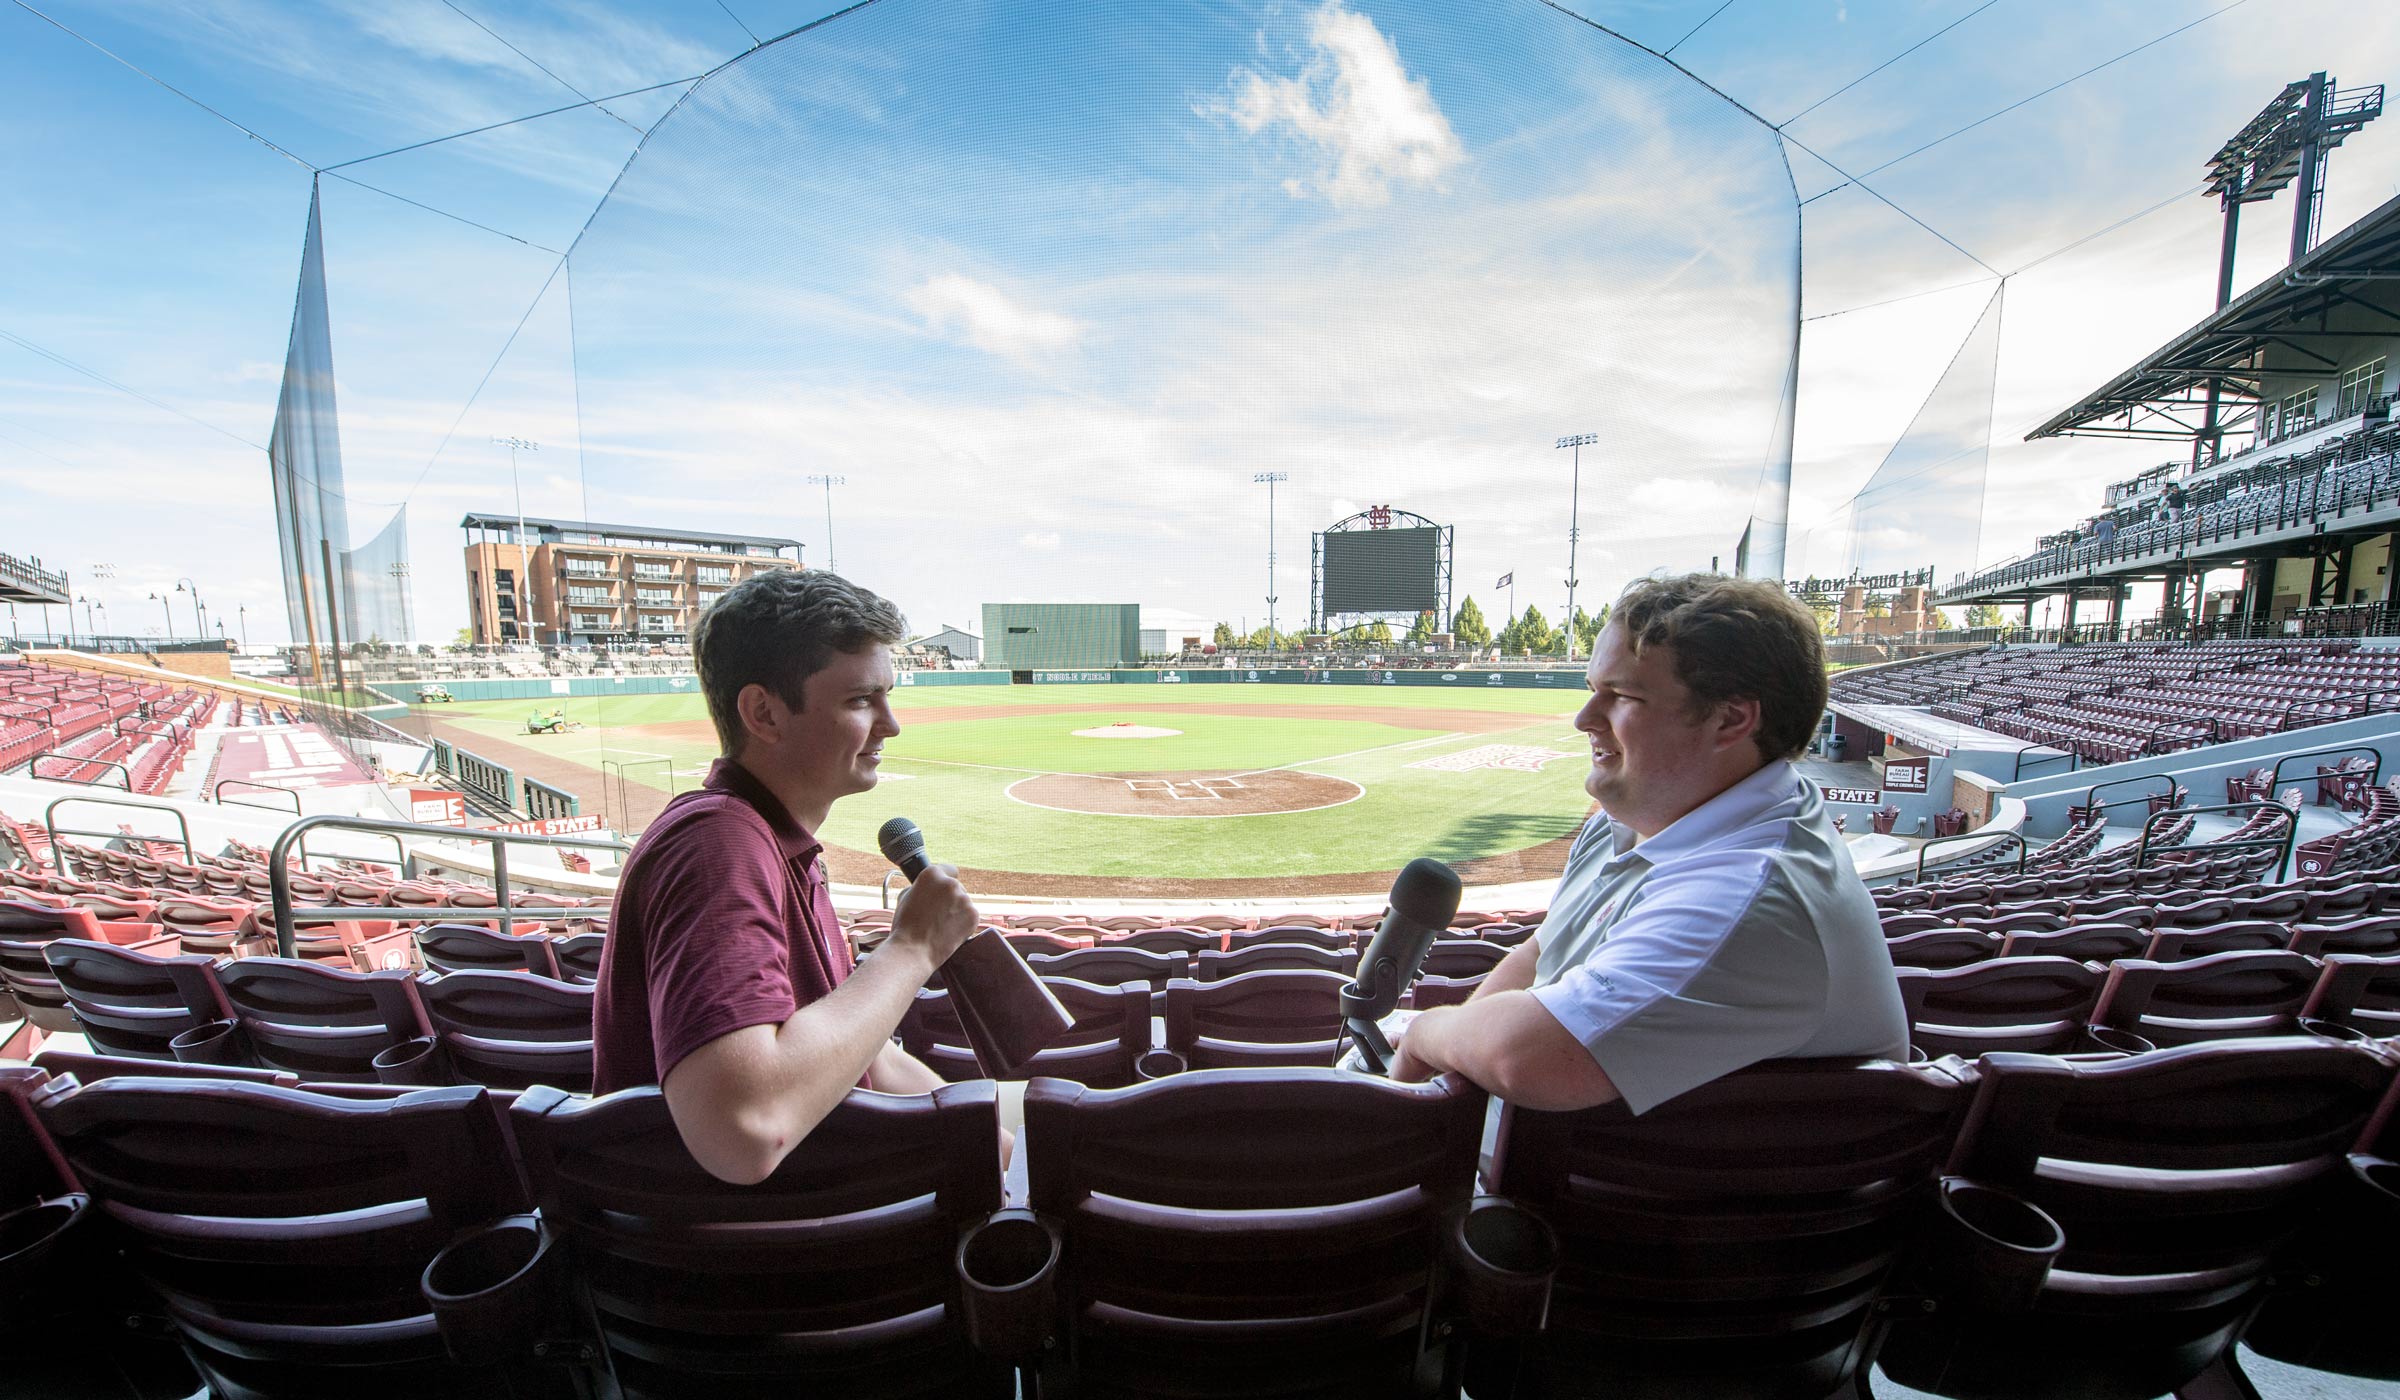 Jack Taylor and Hunter Tew, pictured sitting in the seats at Dudy Noble Field